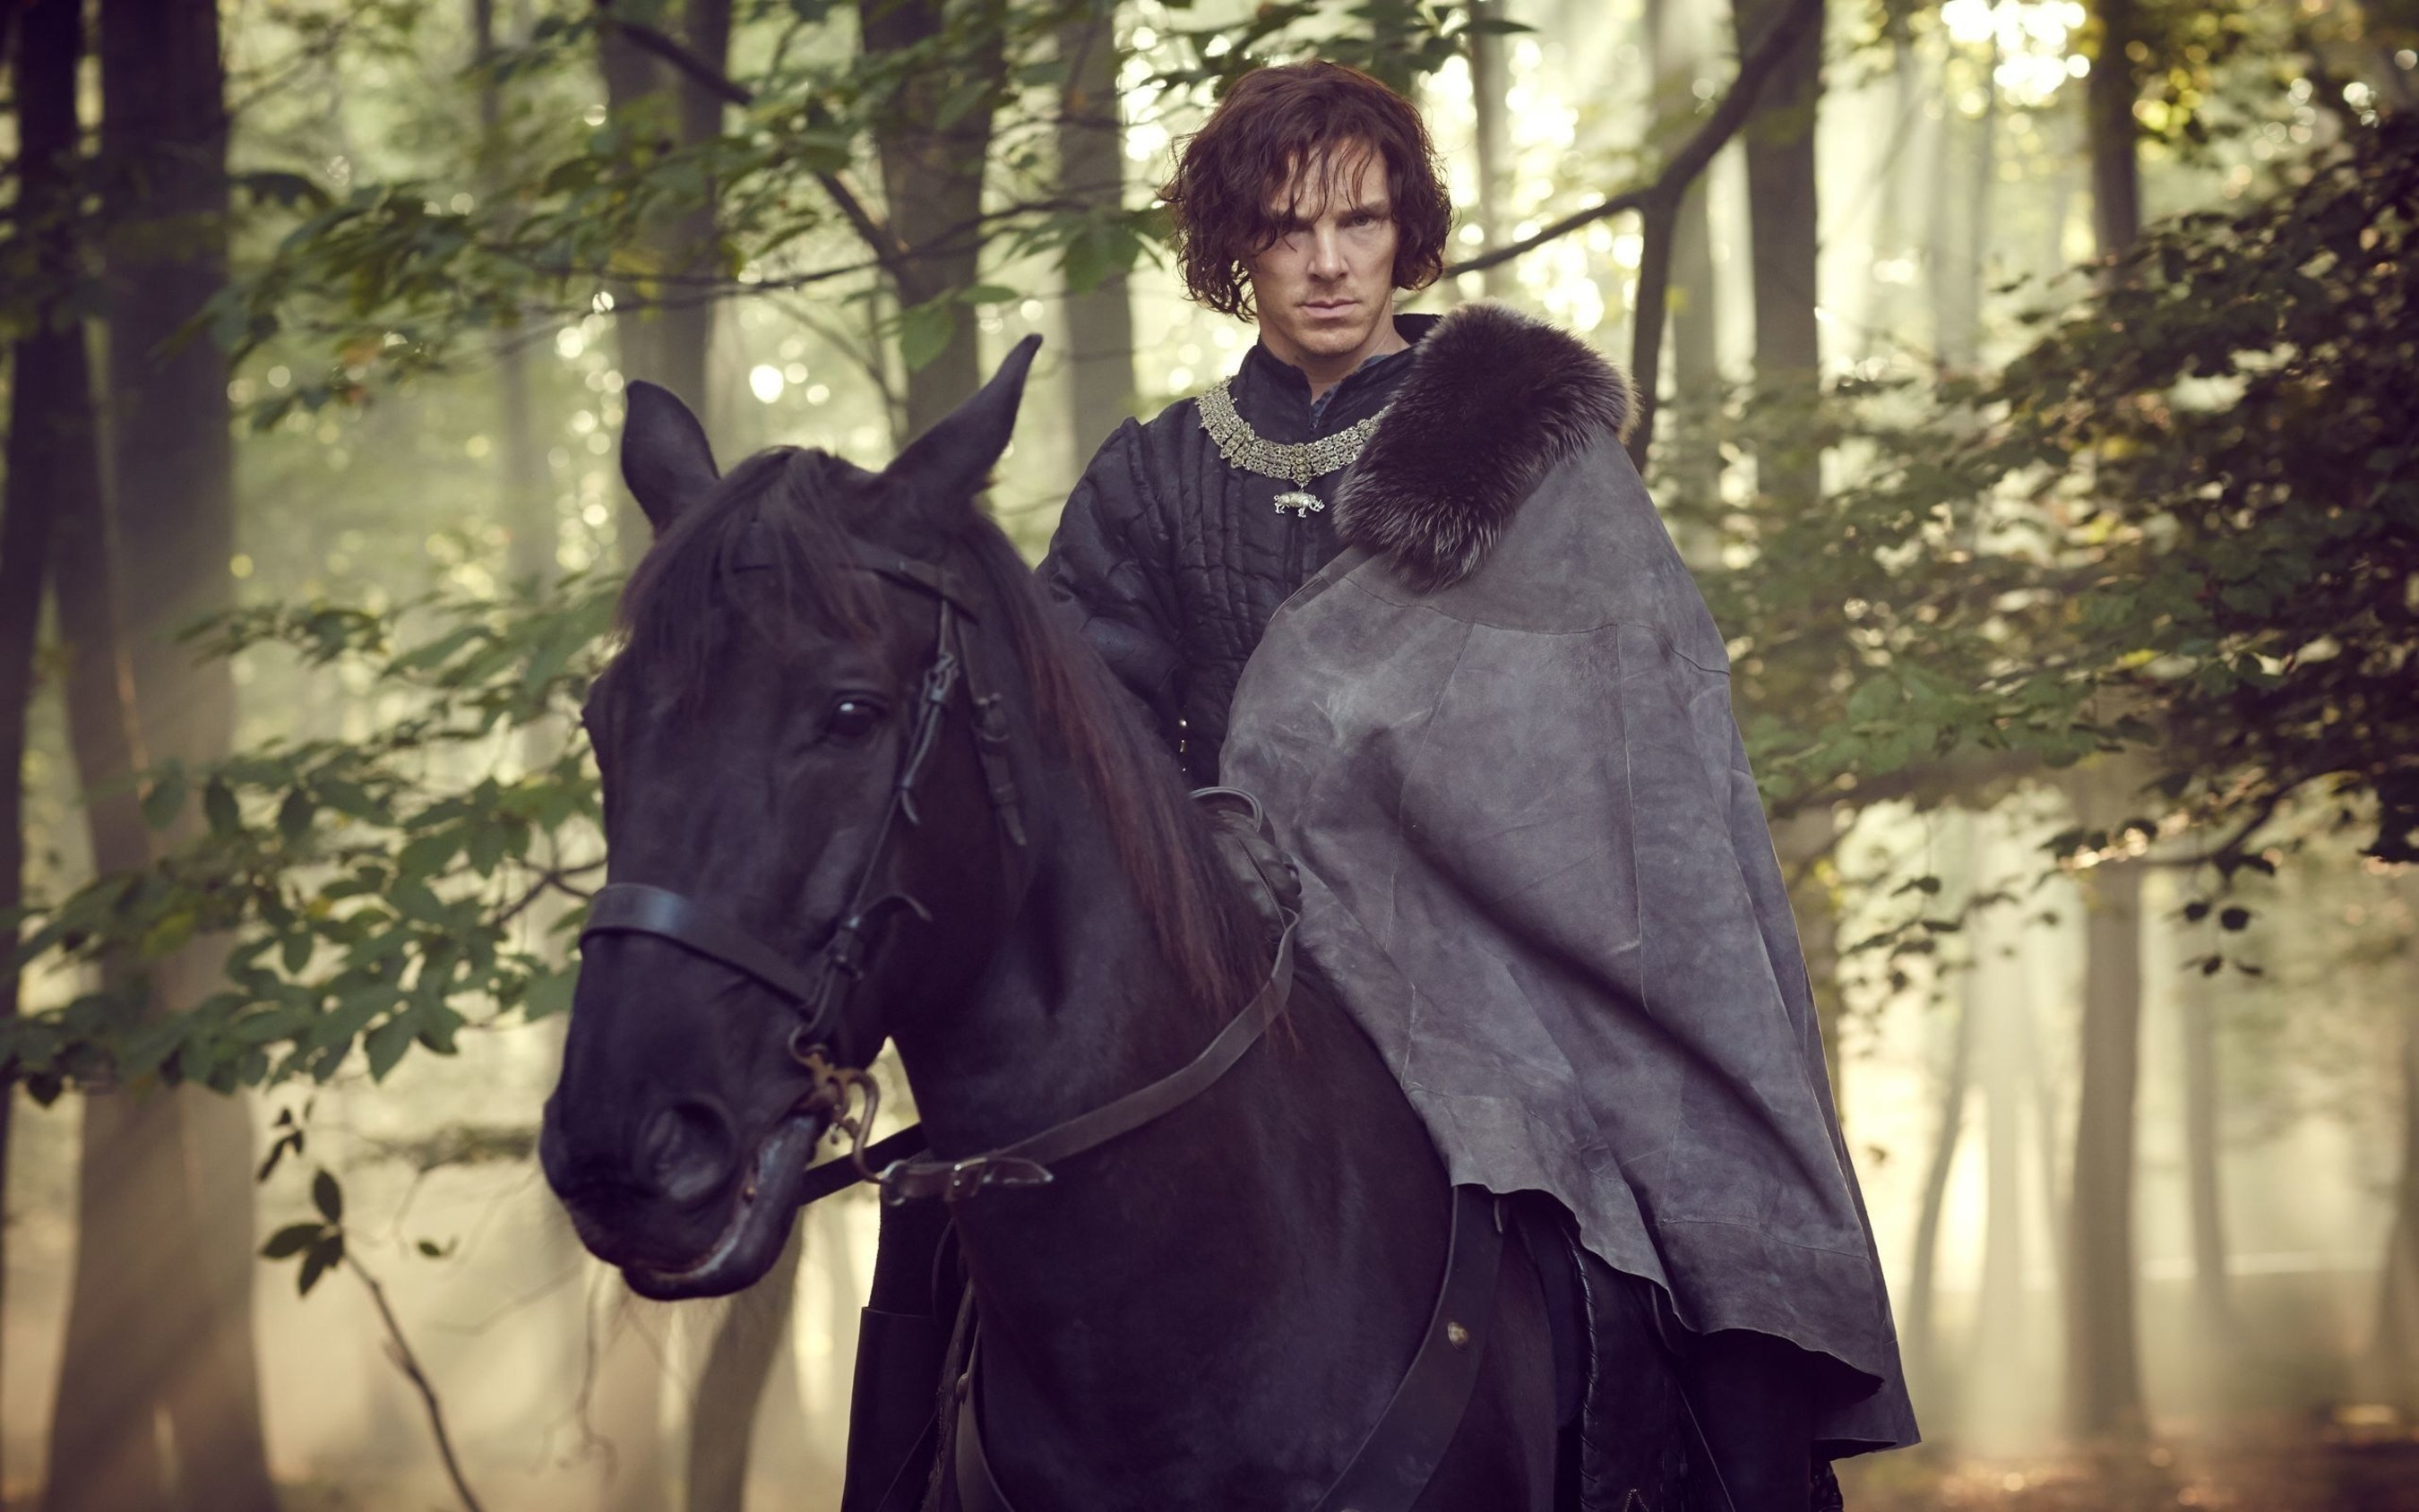 Benedict Cumberbatch (as RICHARD III) in "The Hollow Crown: The Wars of the Roses Henry VI (Part II)." Credit: Robert Viglasky (C) 2015 Carnival Film & Television Ltd